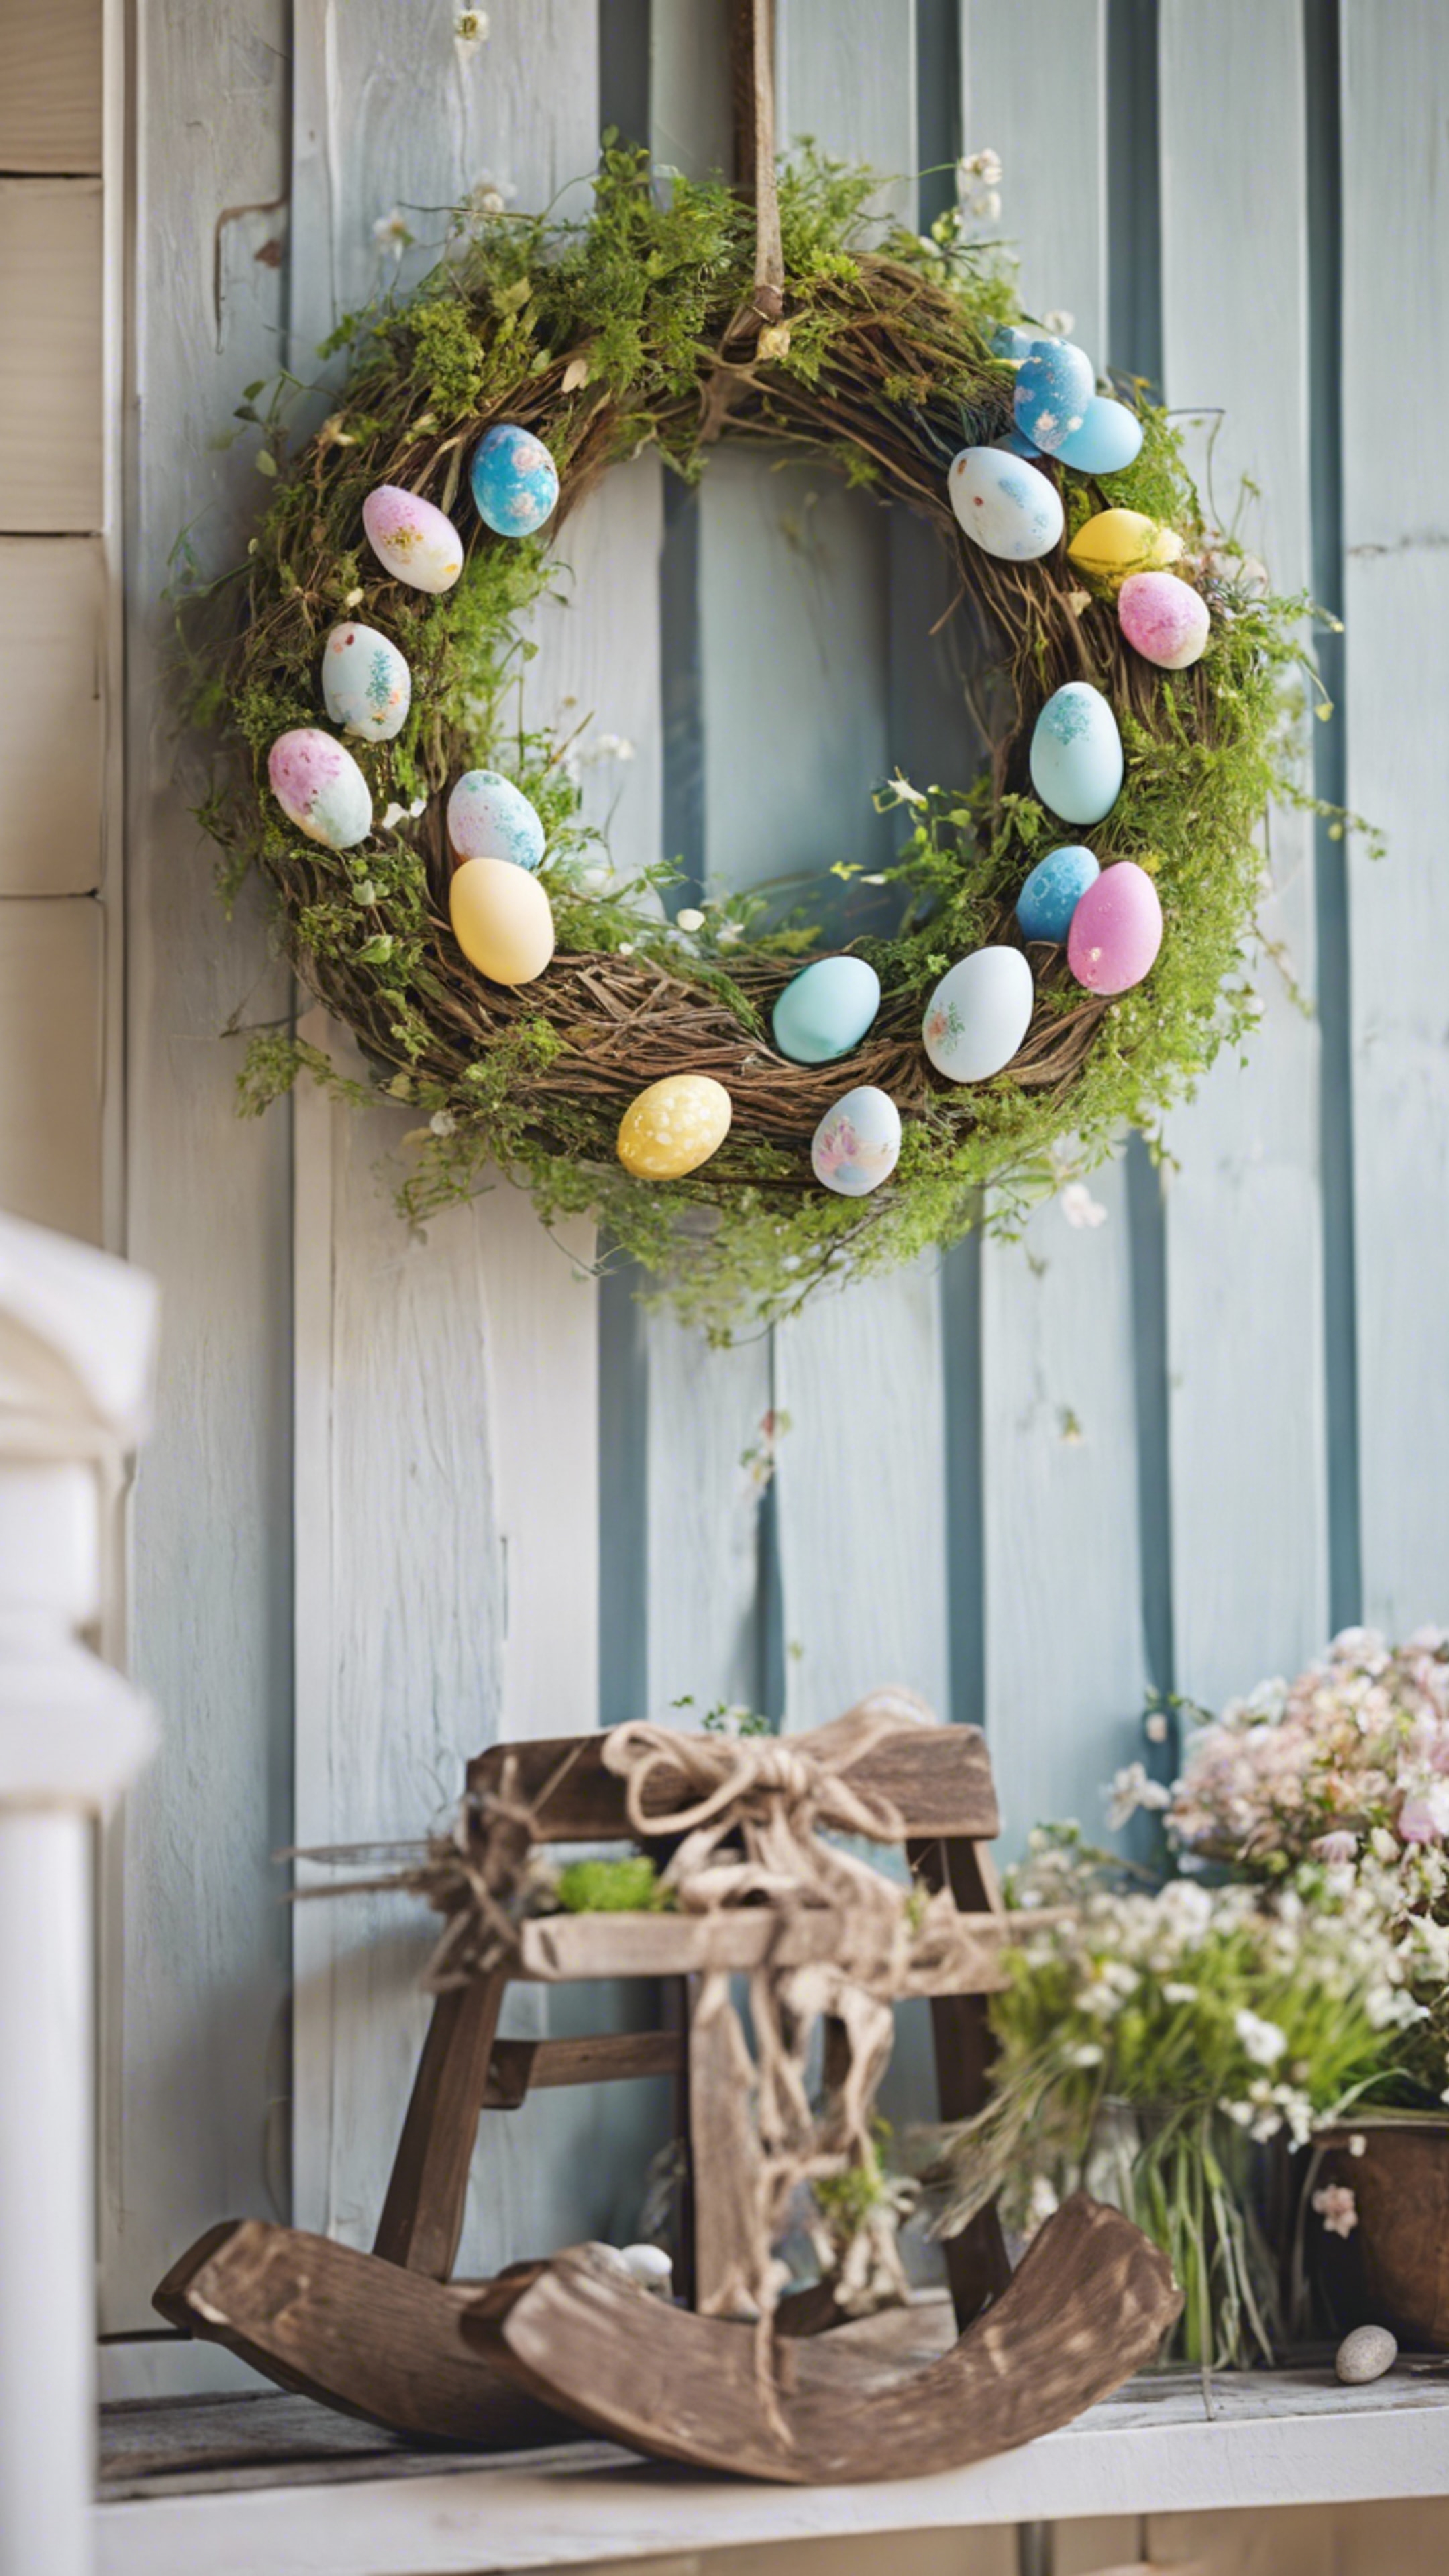 Country-style Easter decorative wreath hanging on a front porch, inviting the spring spirits. Tapet[efa72fd9539f4de39955]